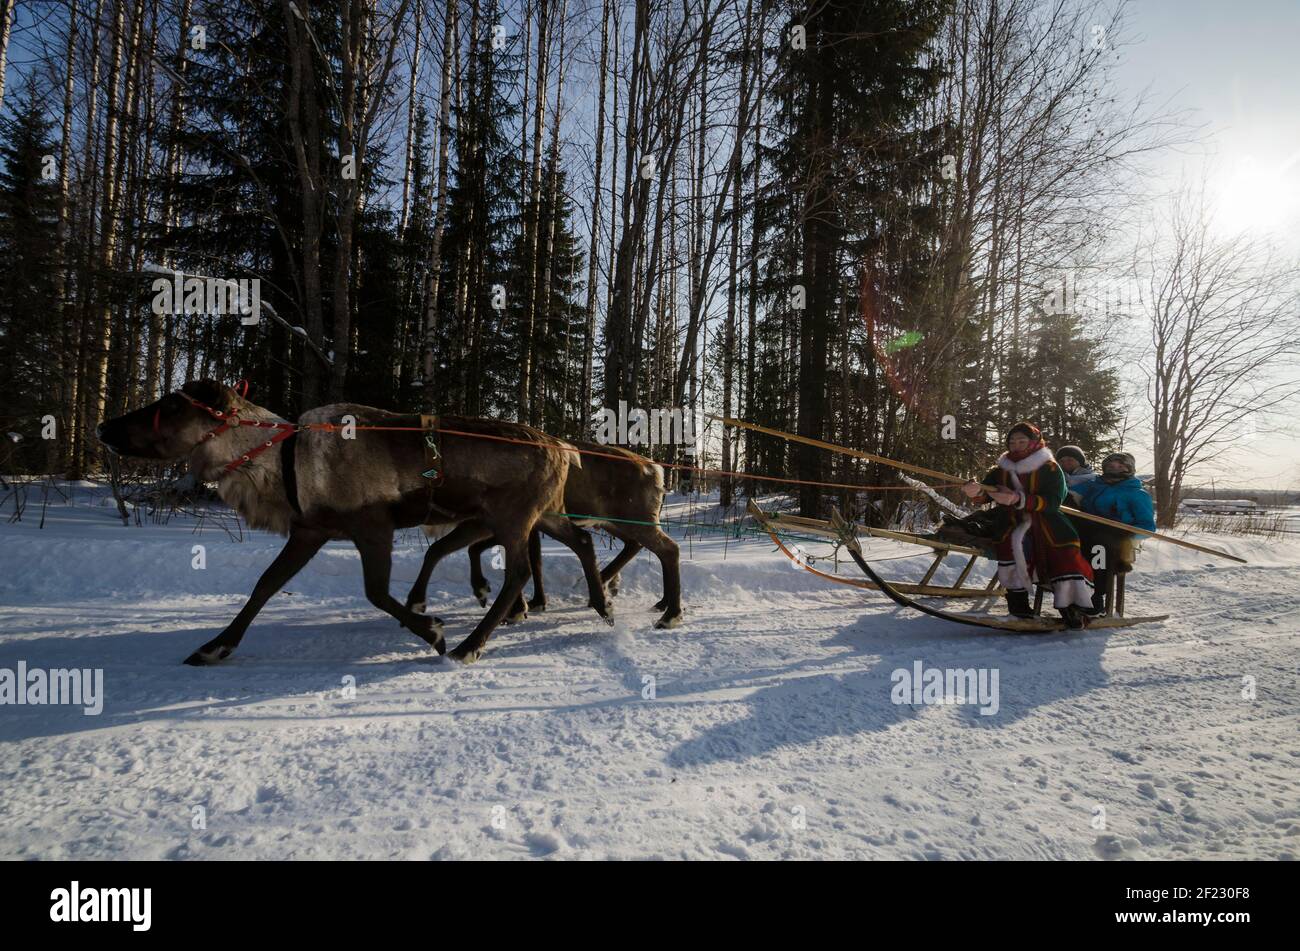 March, 2021 - Golubino. The Nenets are riding a reindeer sleigh. Deer run through the forest. Russia, Arkhangelsk region Stock Photo